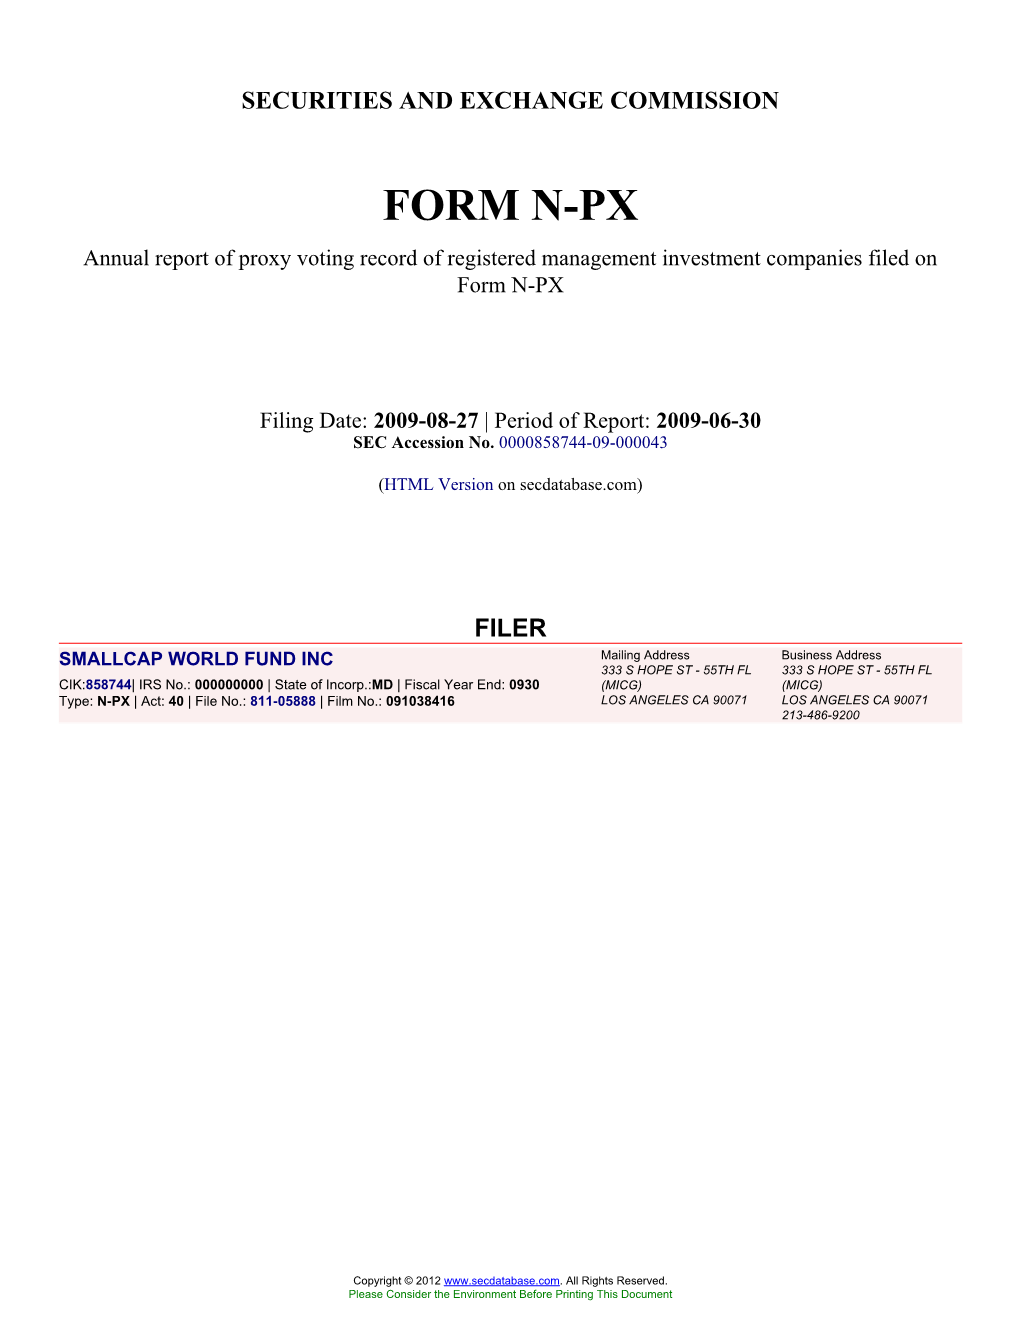 SMALLCAP WORLD FUND INC (Form: N-PX, Filing Date: 08/27/2009)